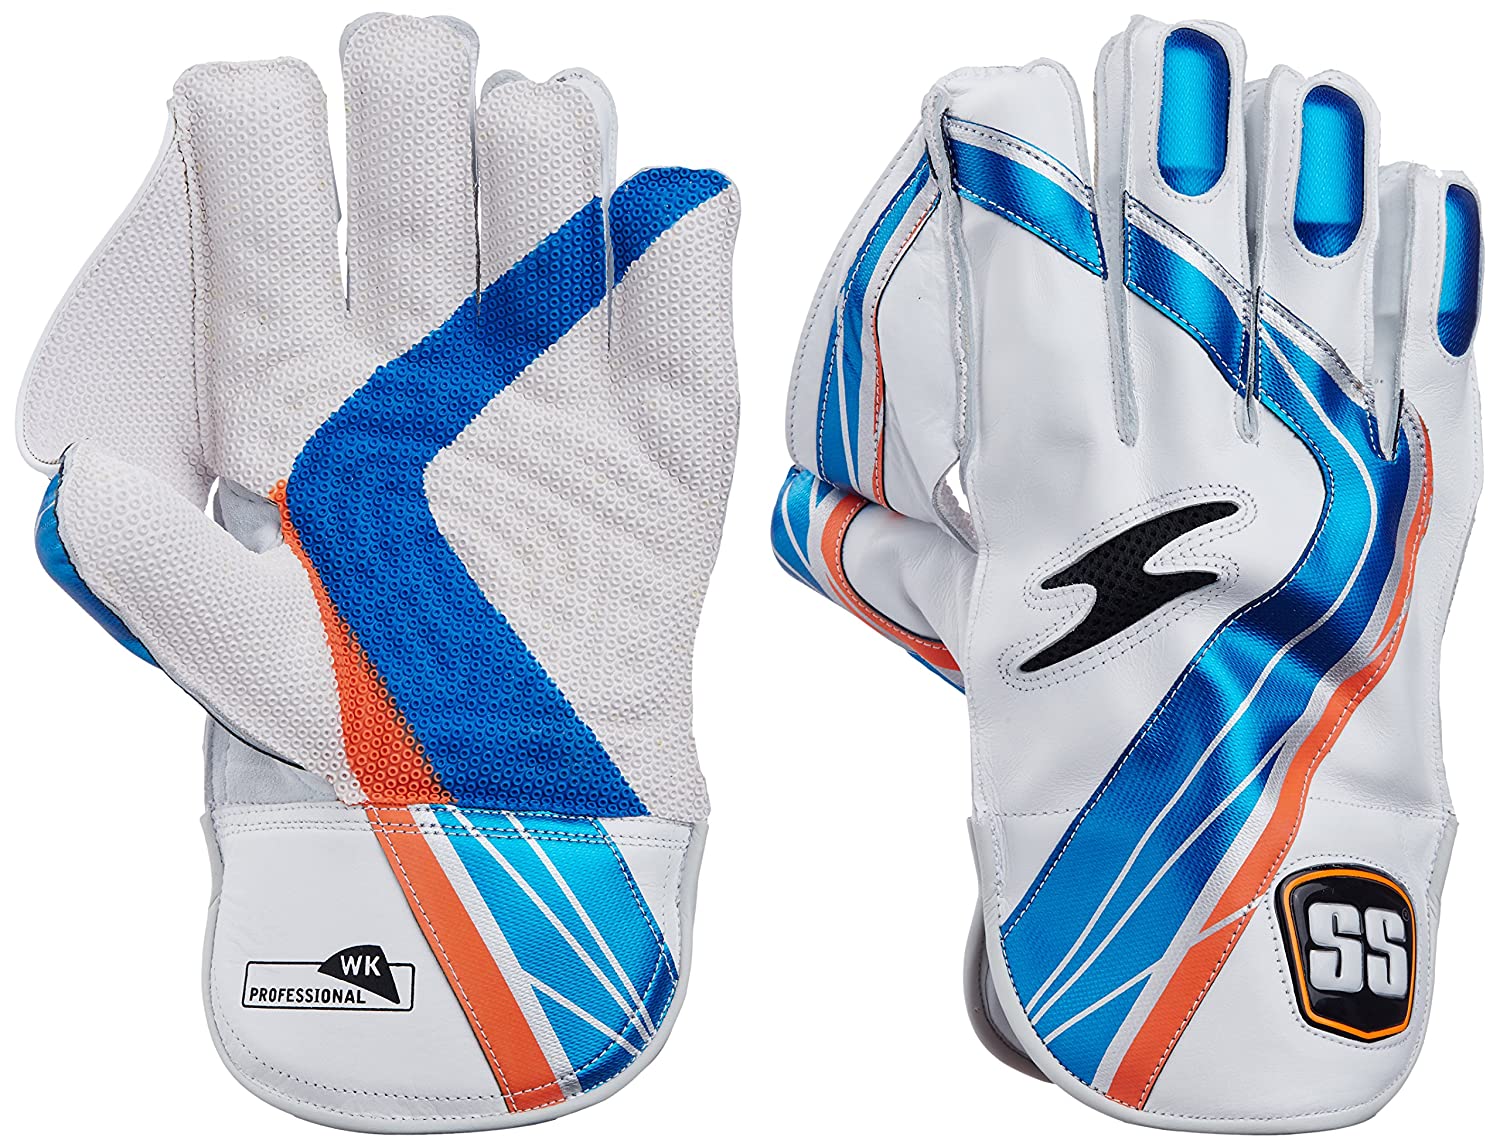 SS PROFESSIONAL WICKET KEEPING GLOVES – MENS